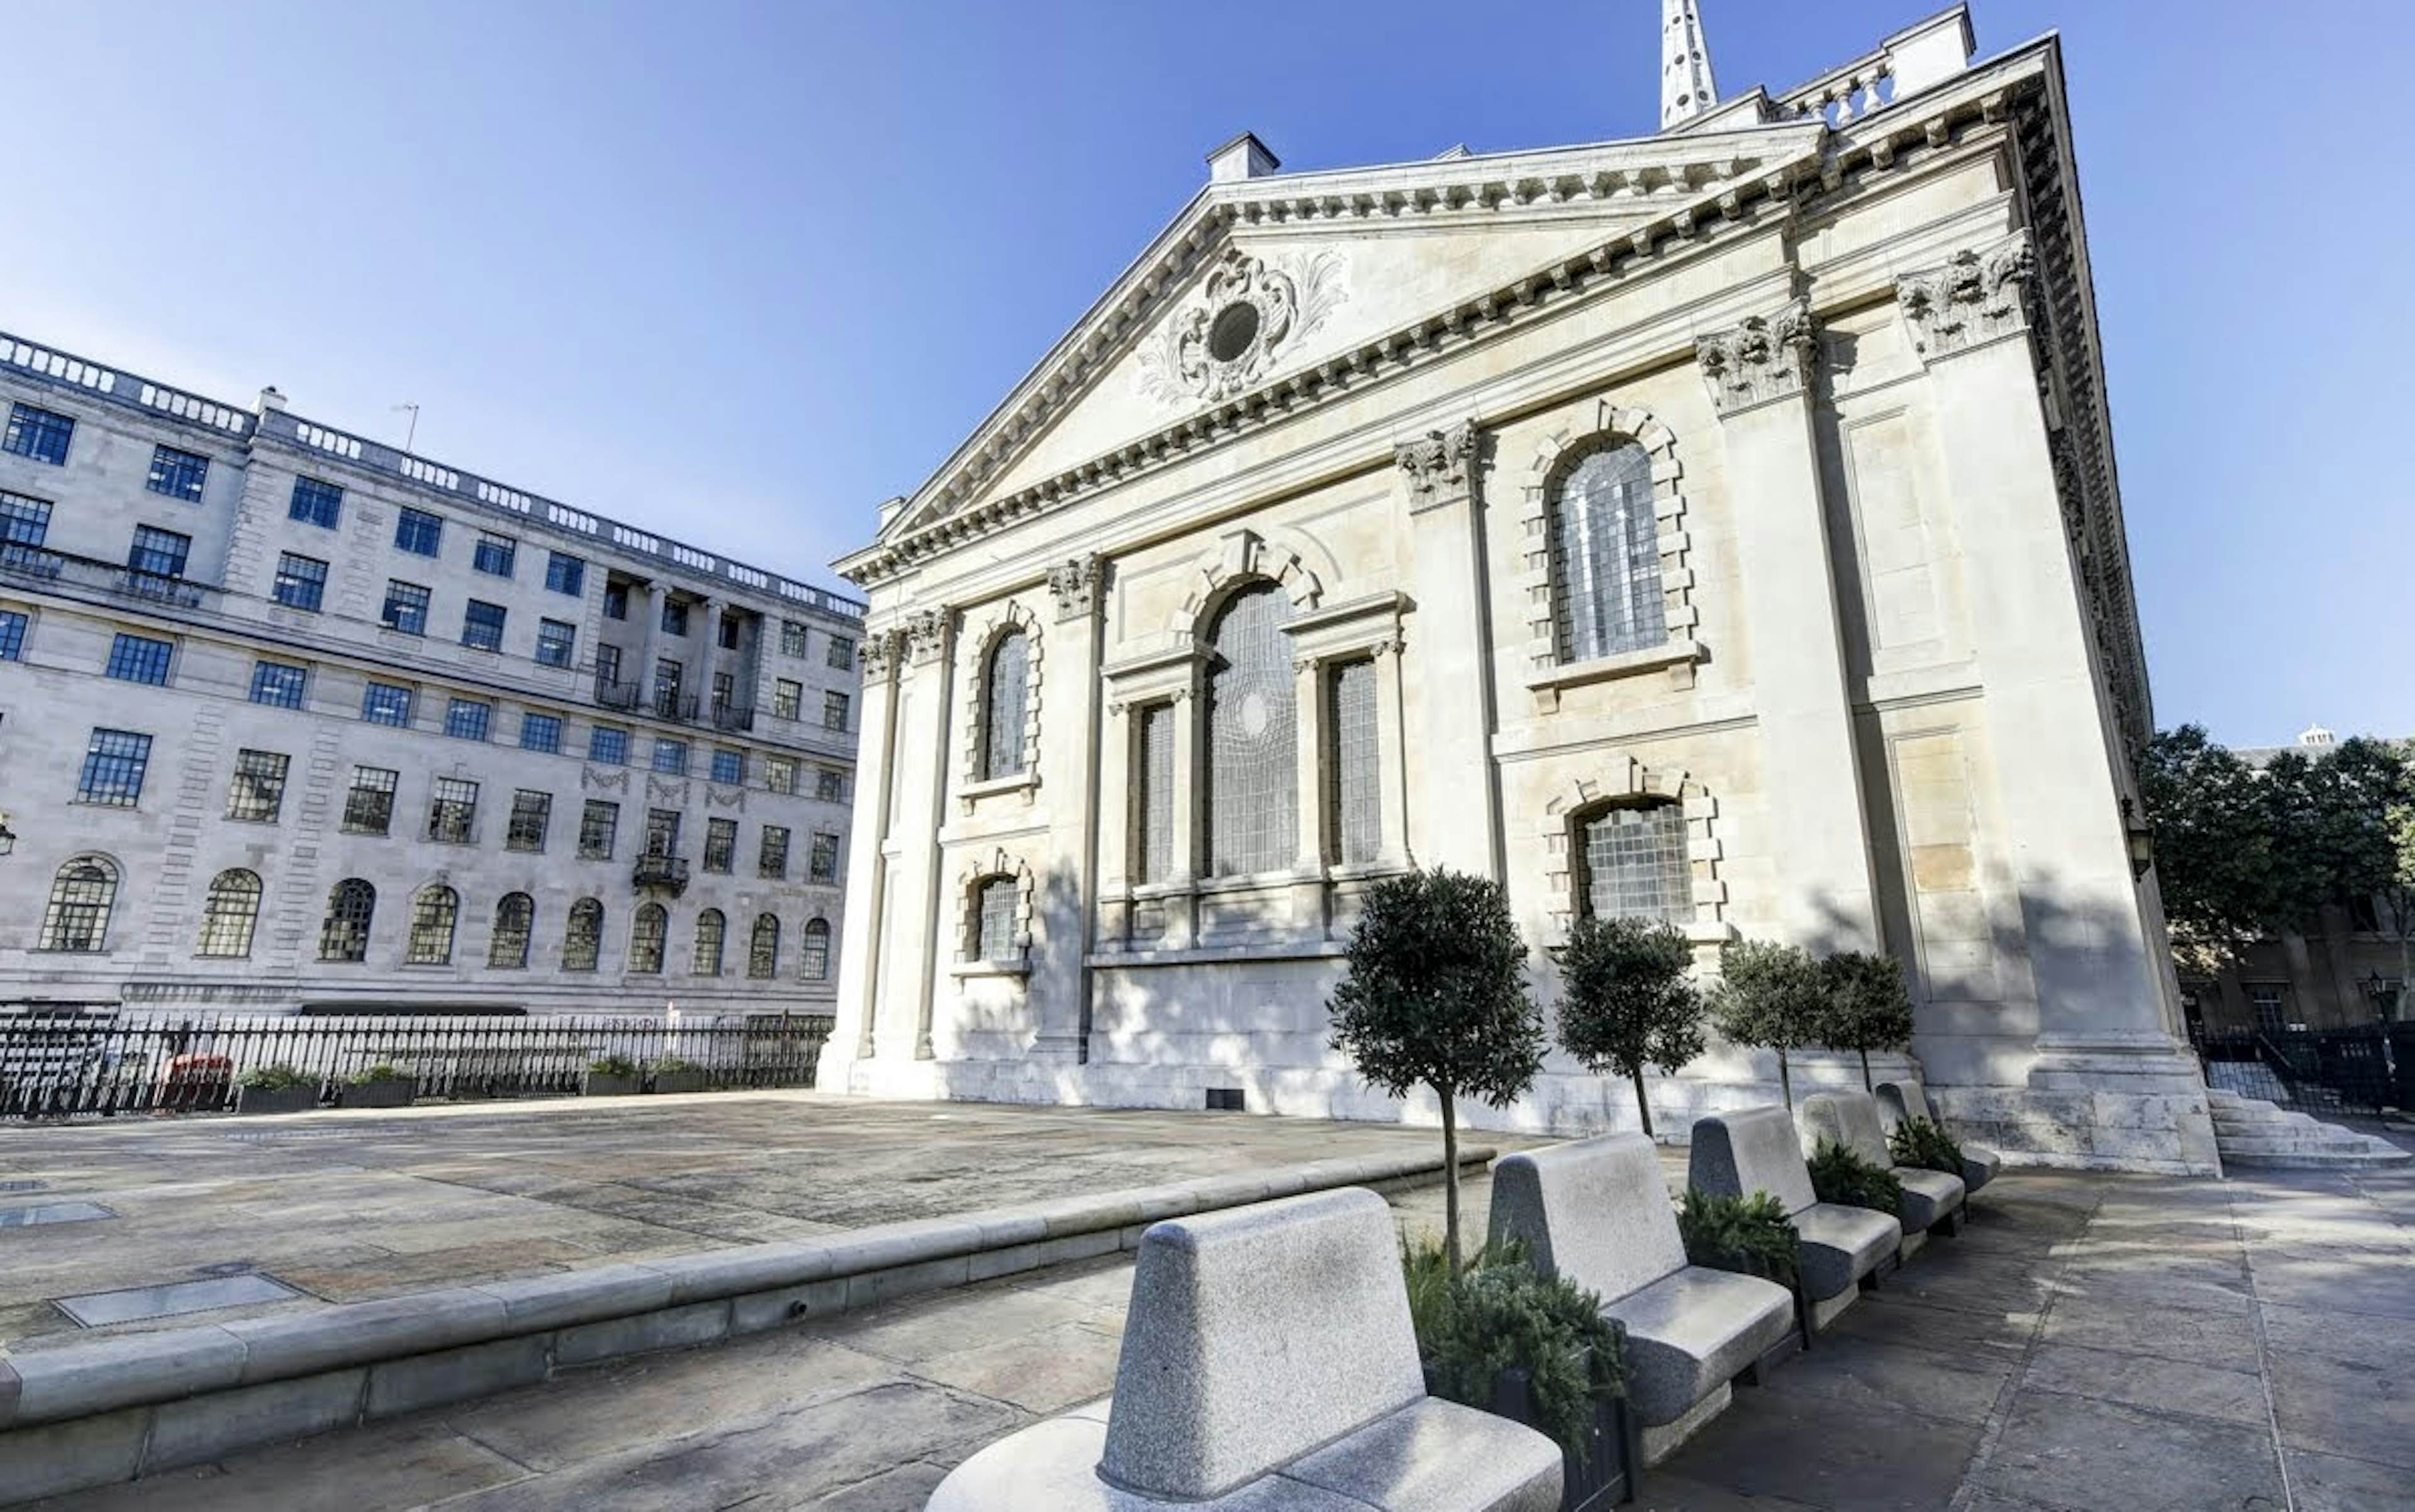 St Martin-in-the-Fields - The Courtyard image 1